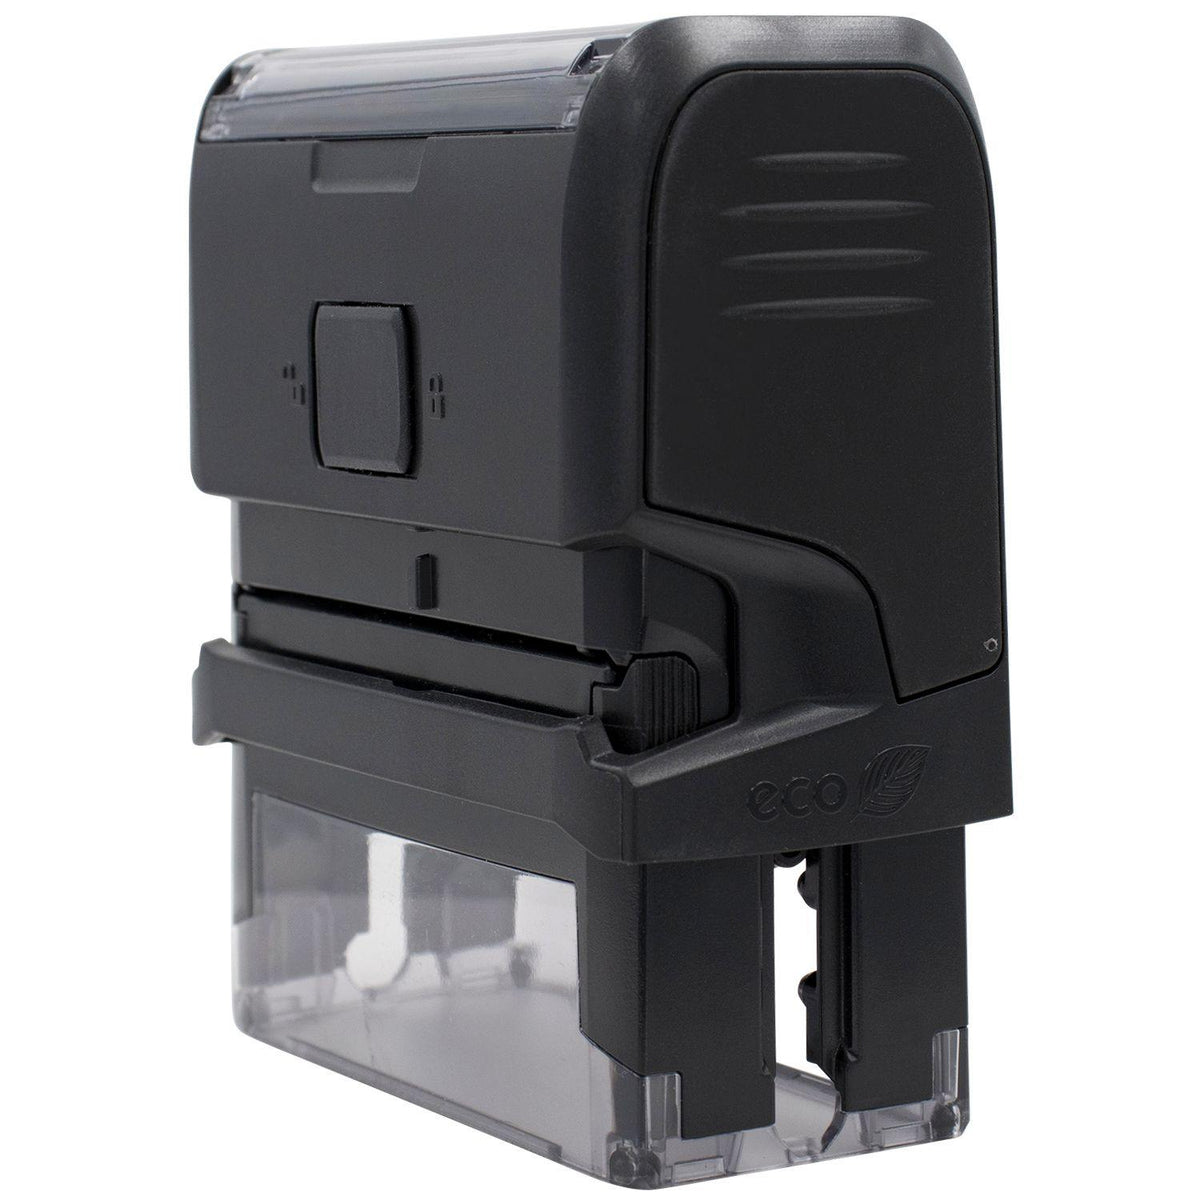 Self-Inking Bold Paid Stamp - Engineer Seal Stamps - Brand_Trodat, Impression Size_Small, Stamp Type_Self-Inking Stamp, Type of Use_Accounting, Type of Use_Finance, Type of Use_Office